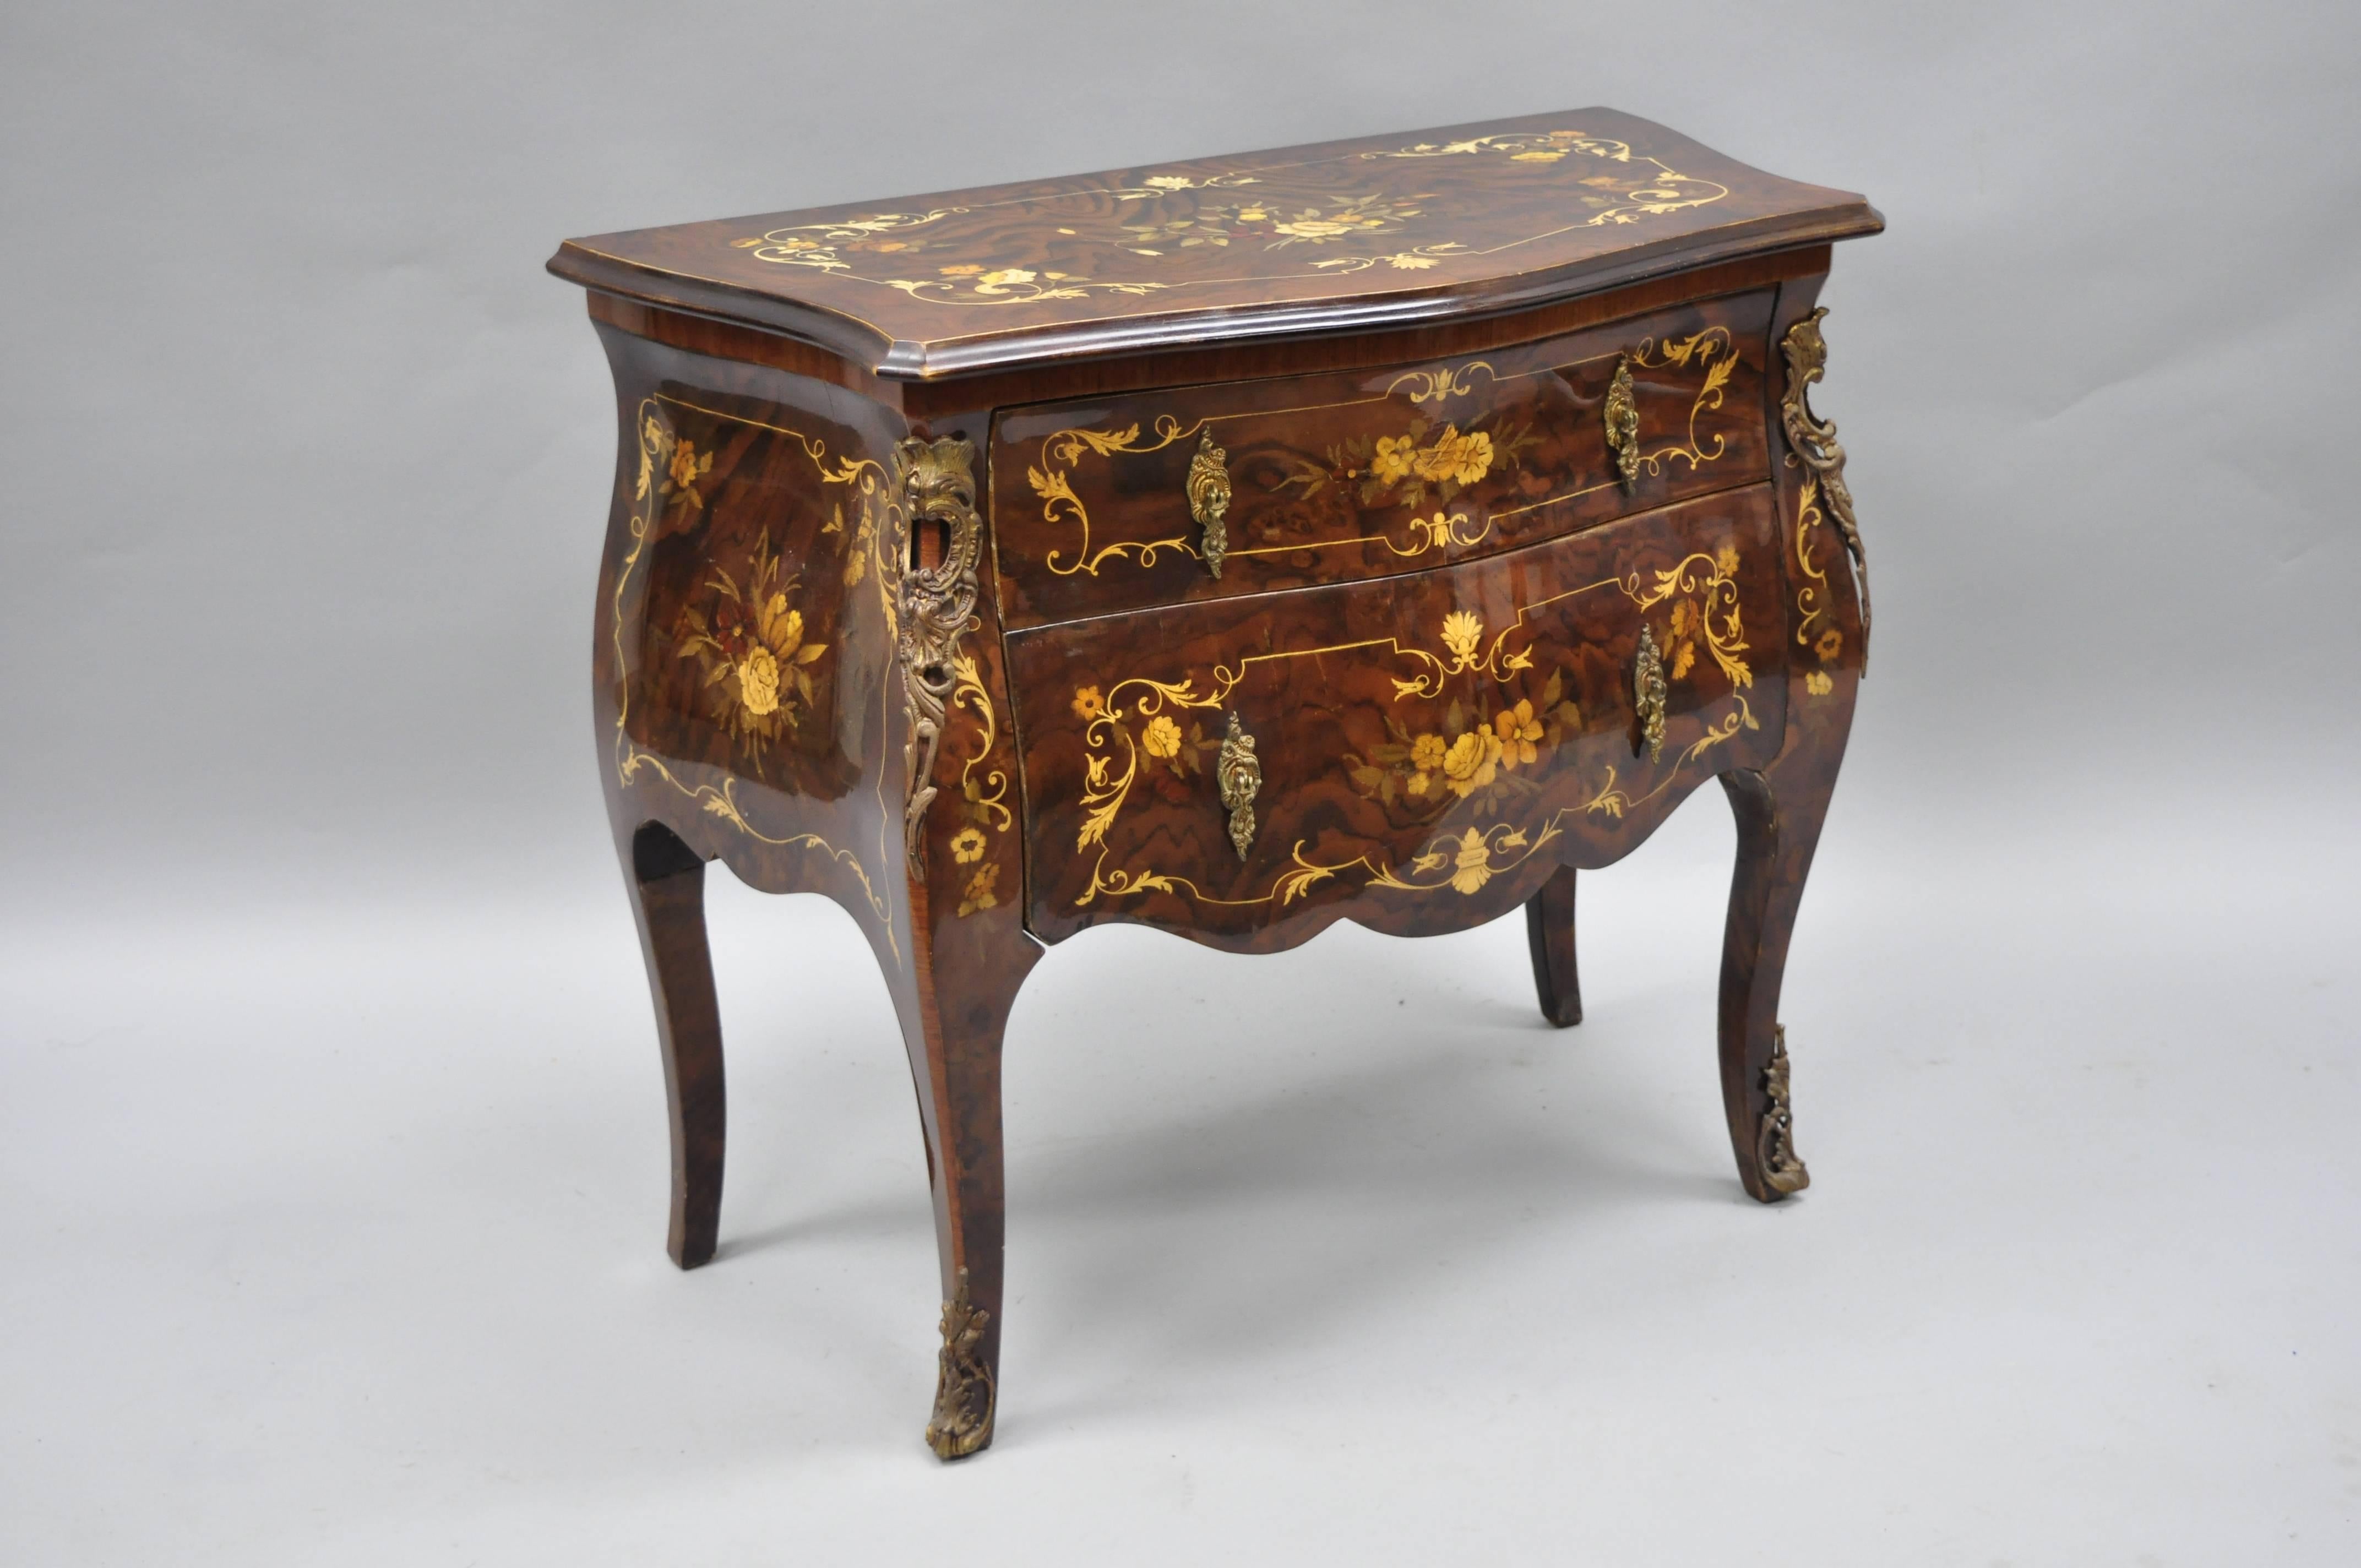 Pair of Italian Inlaid French Louis XV Style Bombe Nightstands by Roma Furniture in Walnut Briar. Nightstands feature beautiful floral inlay, bronze ormolu, shapely bombe form, two dovetailed drawers, cabriole legs, and stunning walnut briar wood